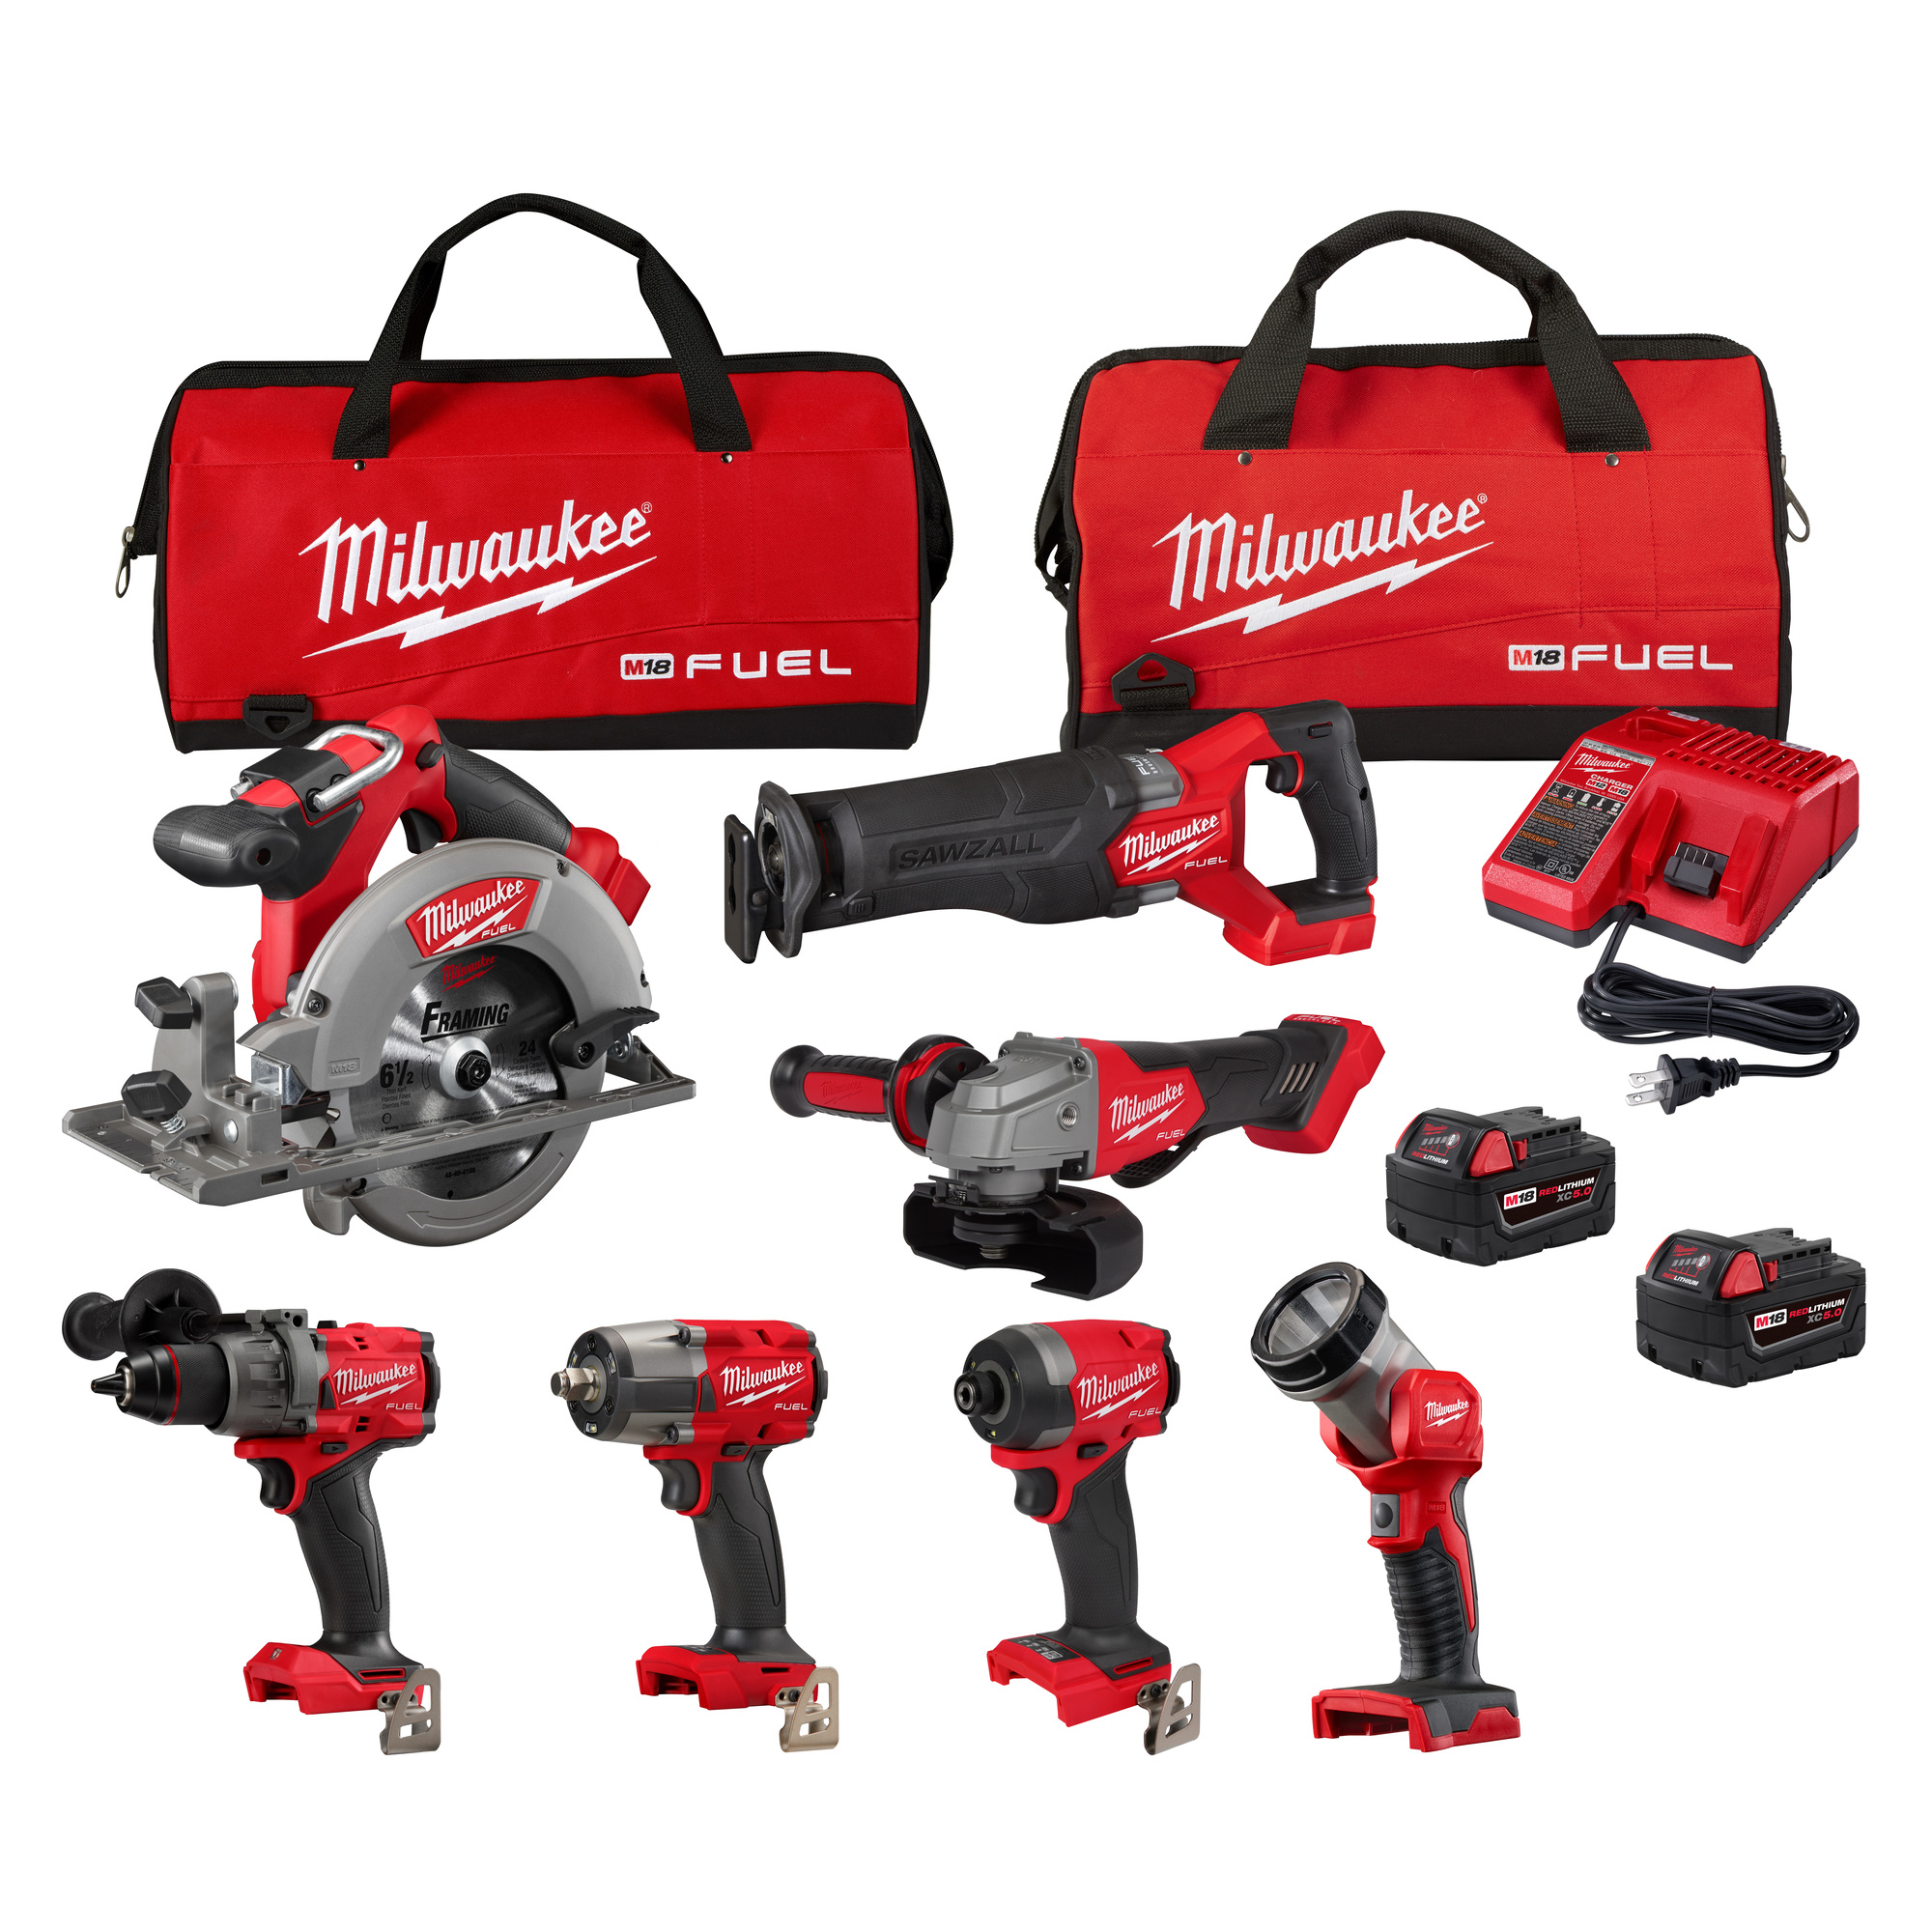 Milwaukee, M18 FUEL 7-Tool Combo Kit, Chuck Size 1/4 in, Drive Size 1/4 in, Tools Included (qty.) 7, Model 3697-27